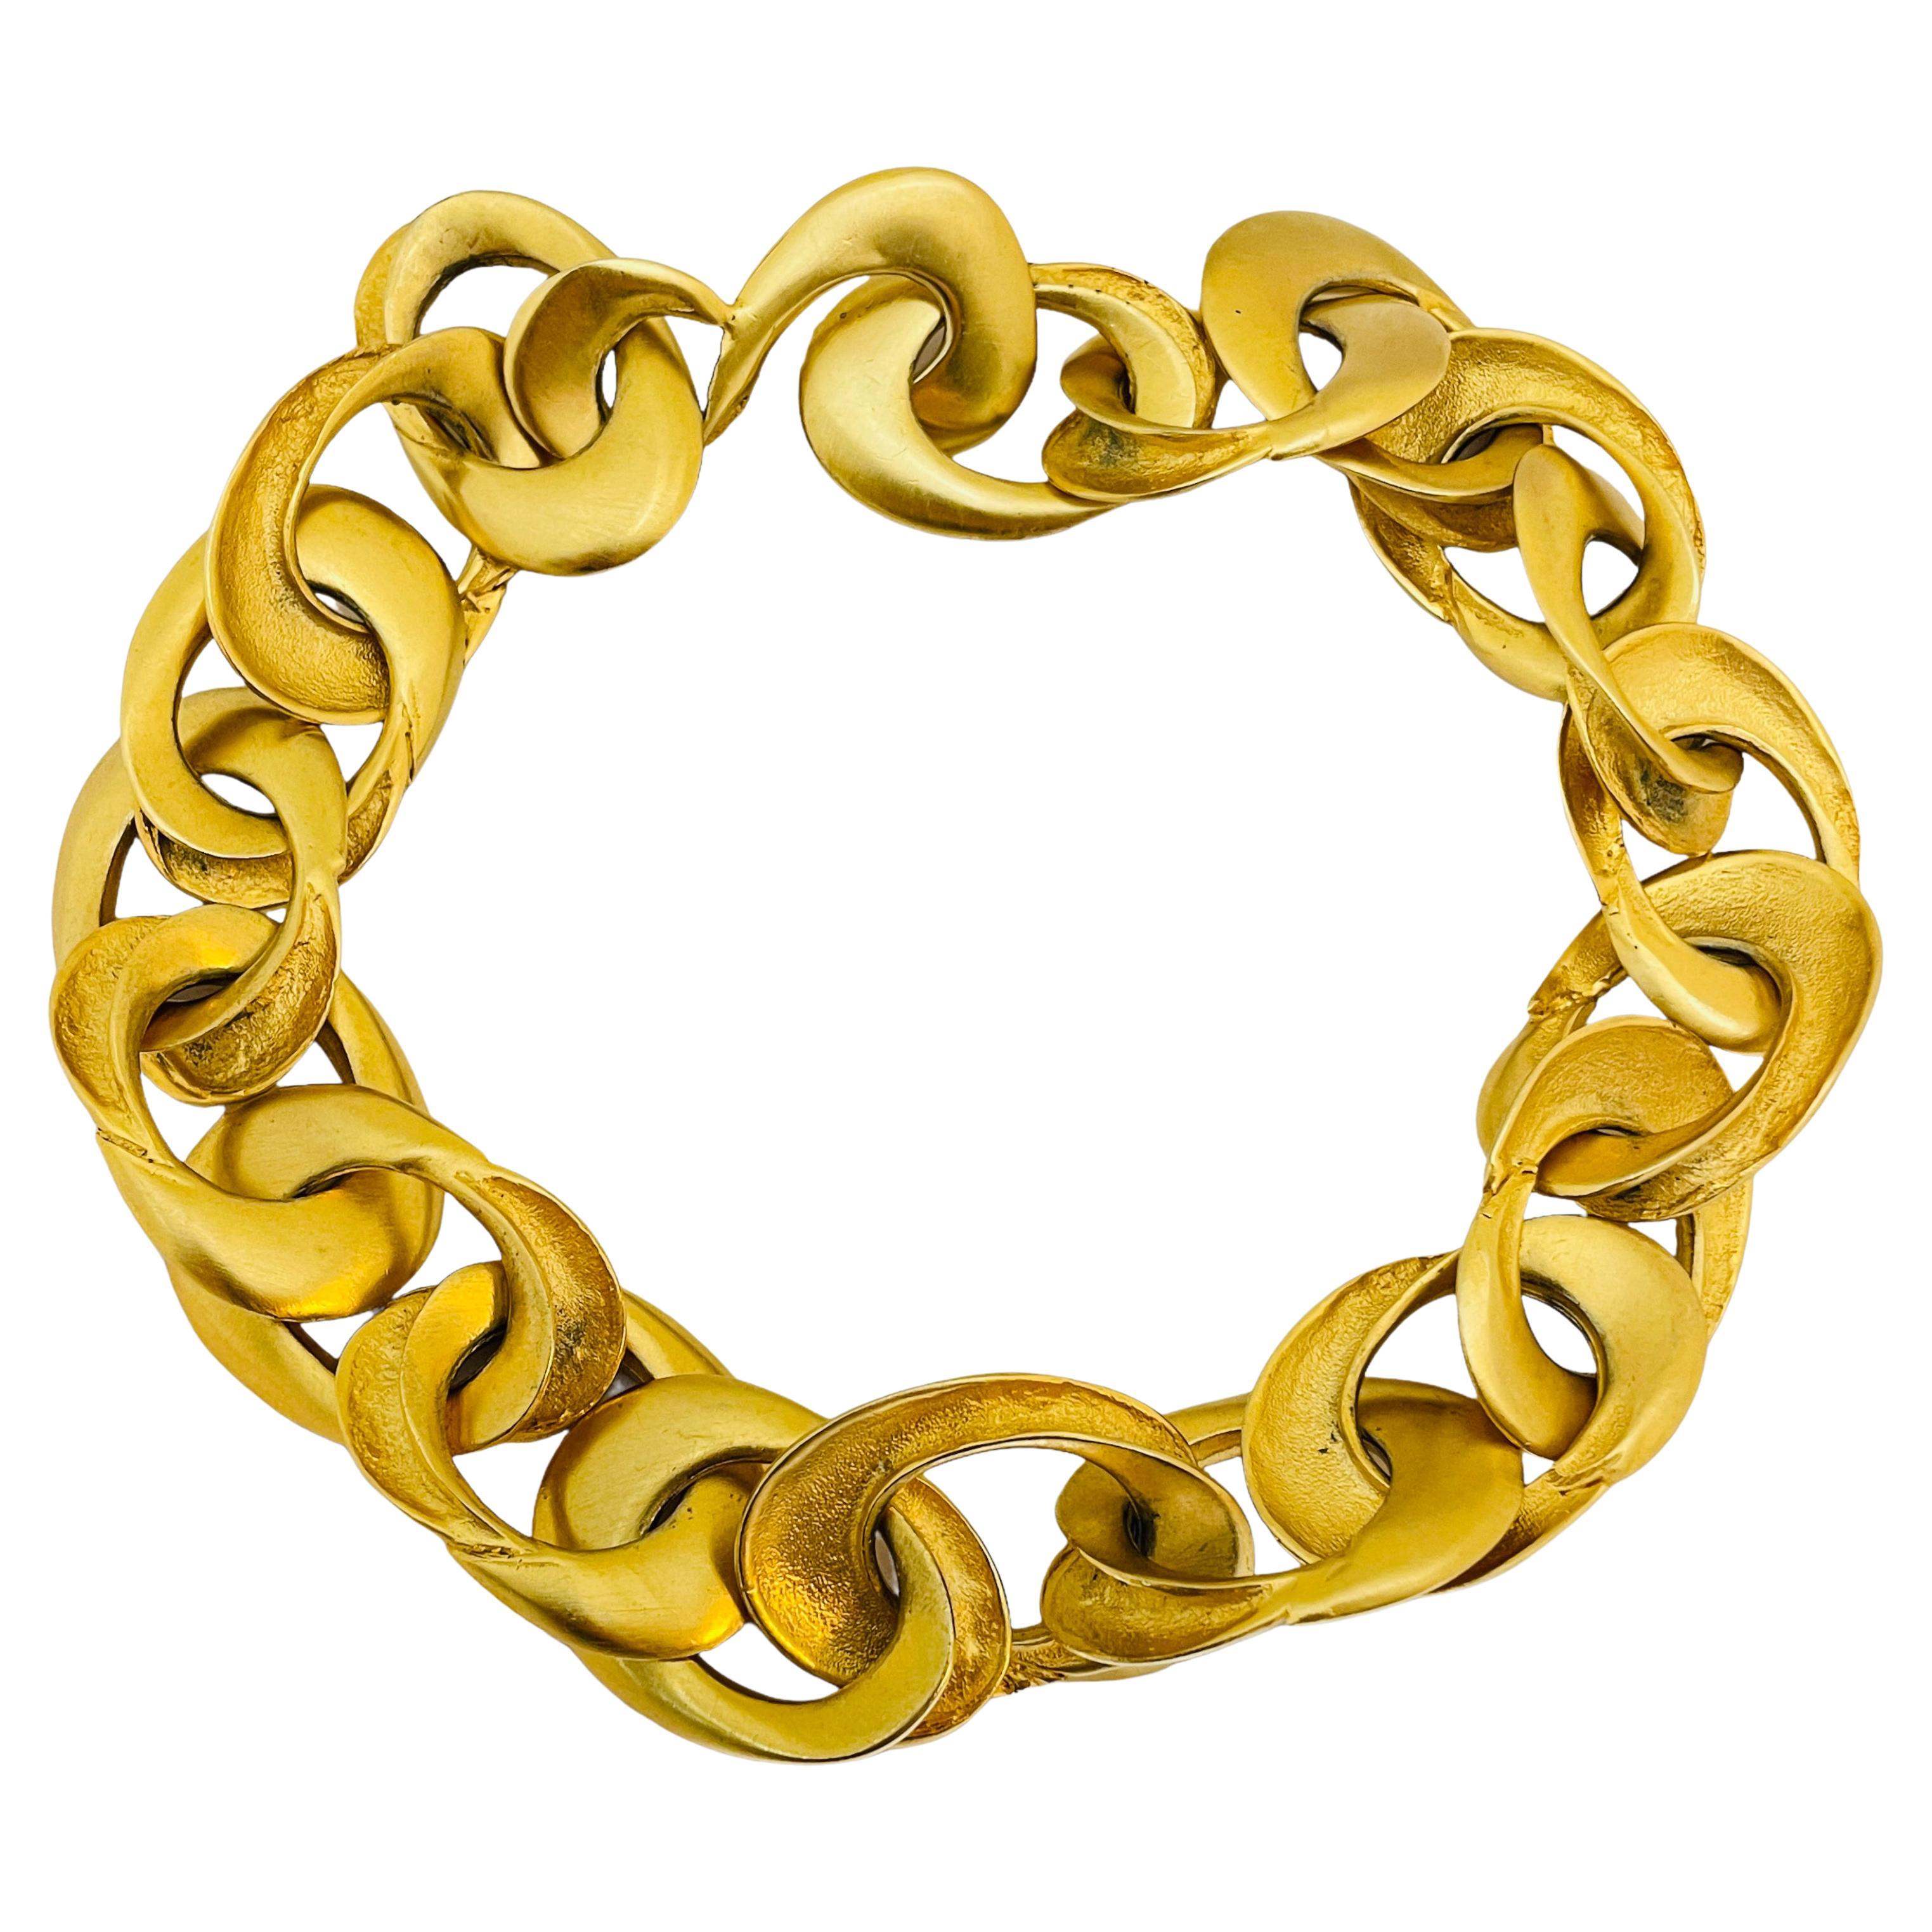 What is matte gold jewelry?